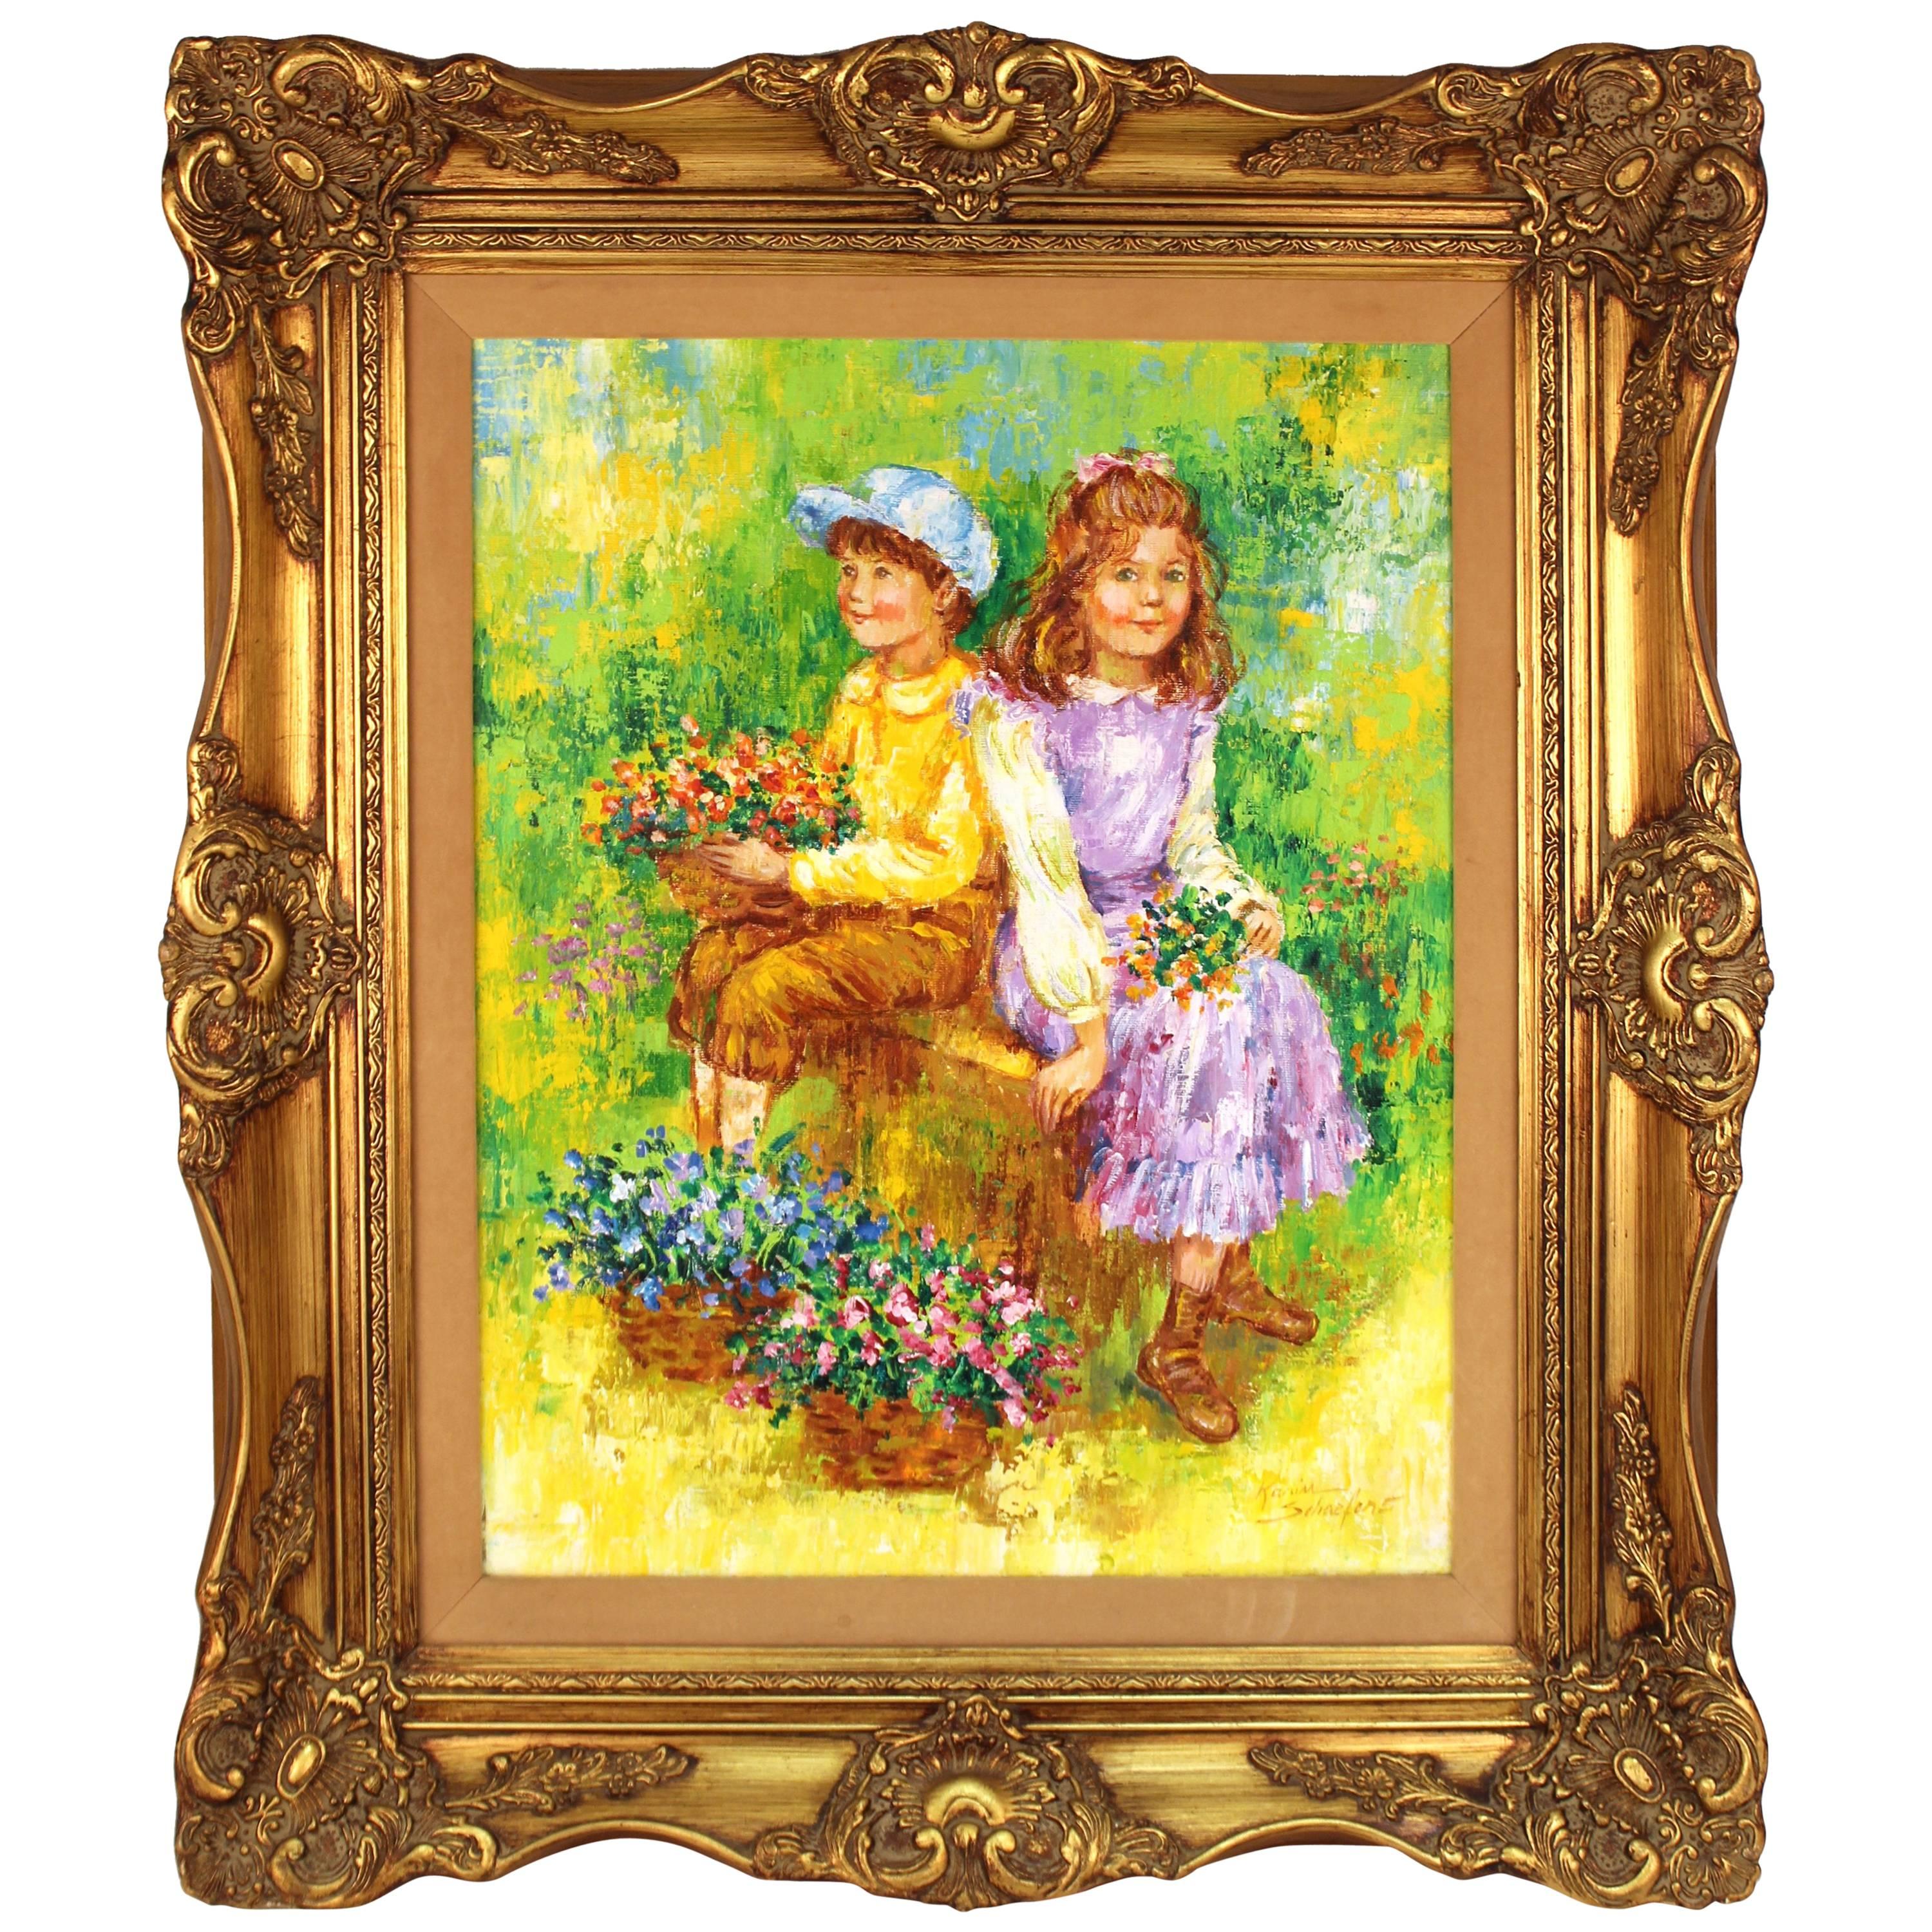  Painting Titled 'Children Holding Flowers in a Field' by Karin Schaefers  For Sale